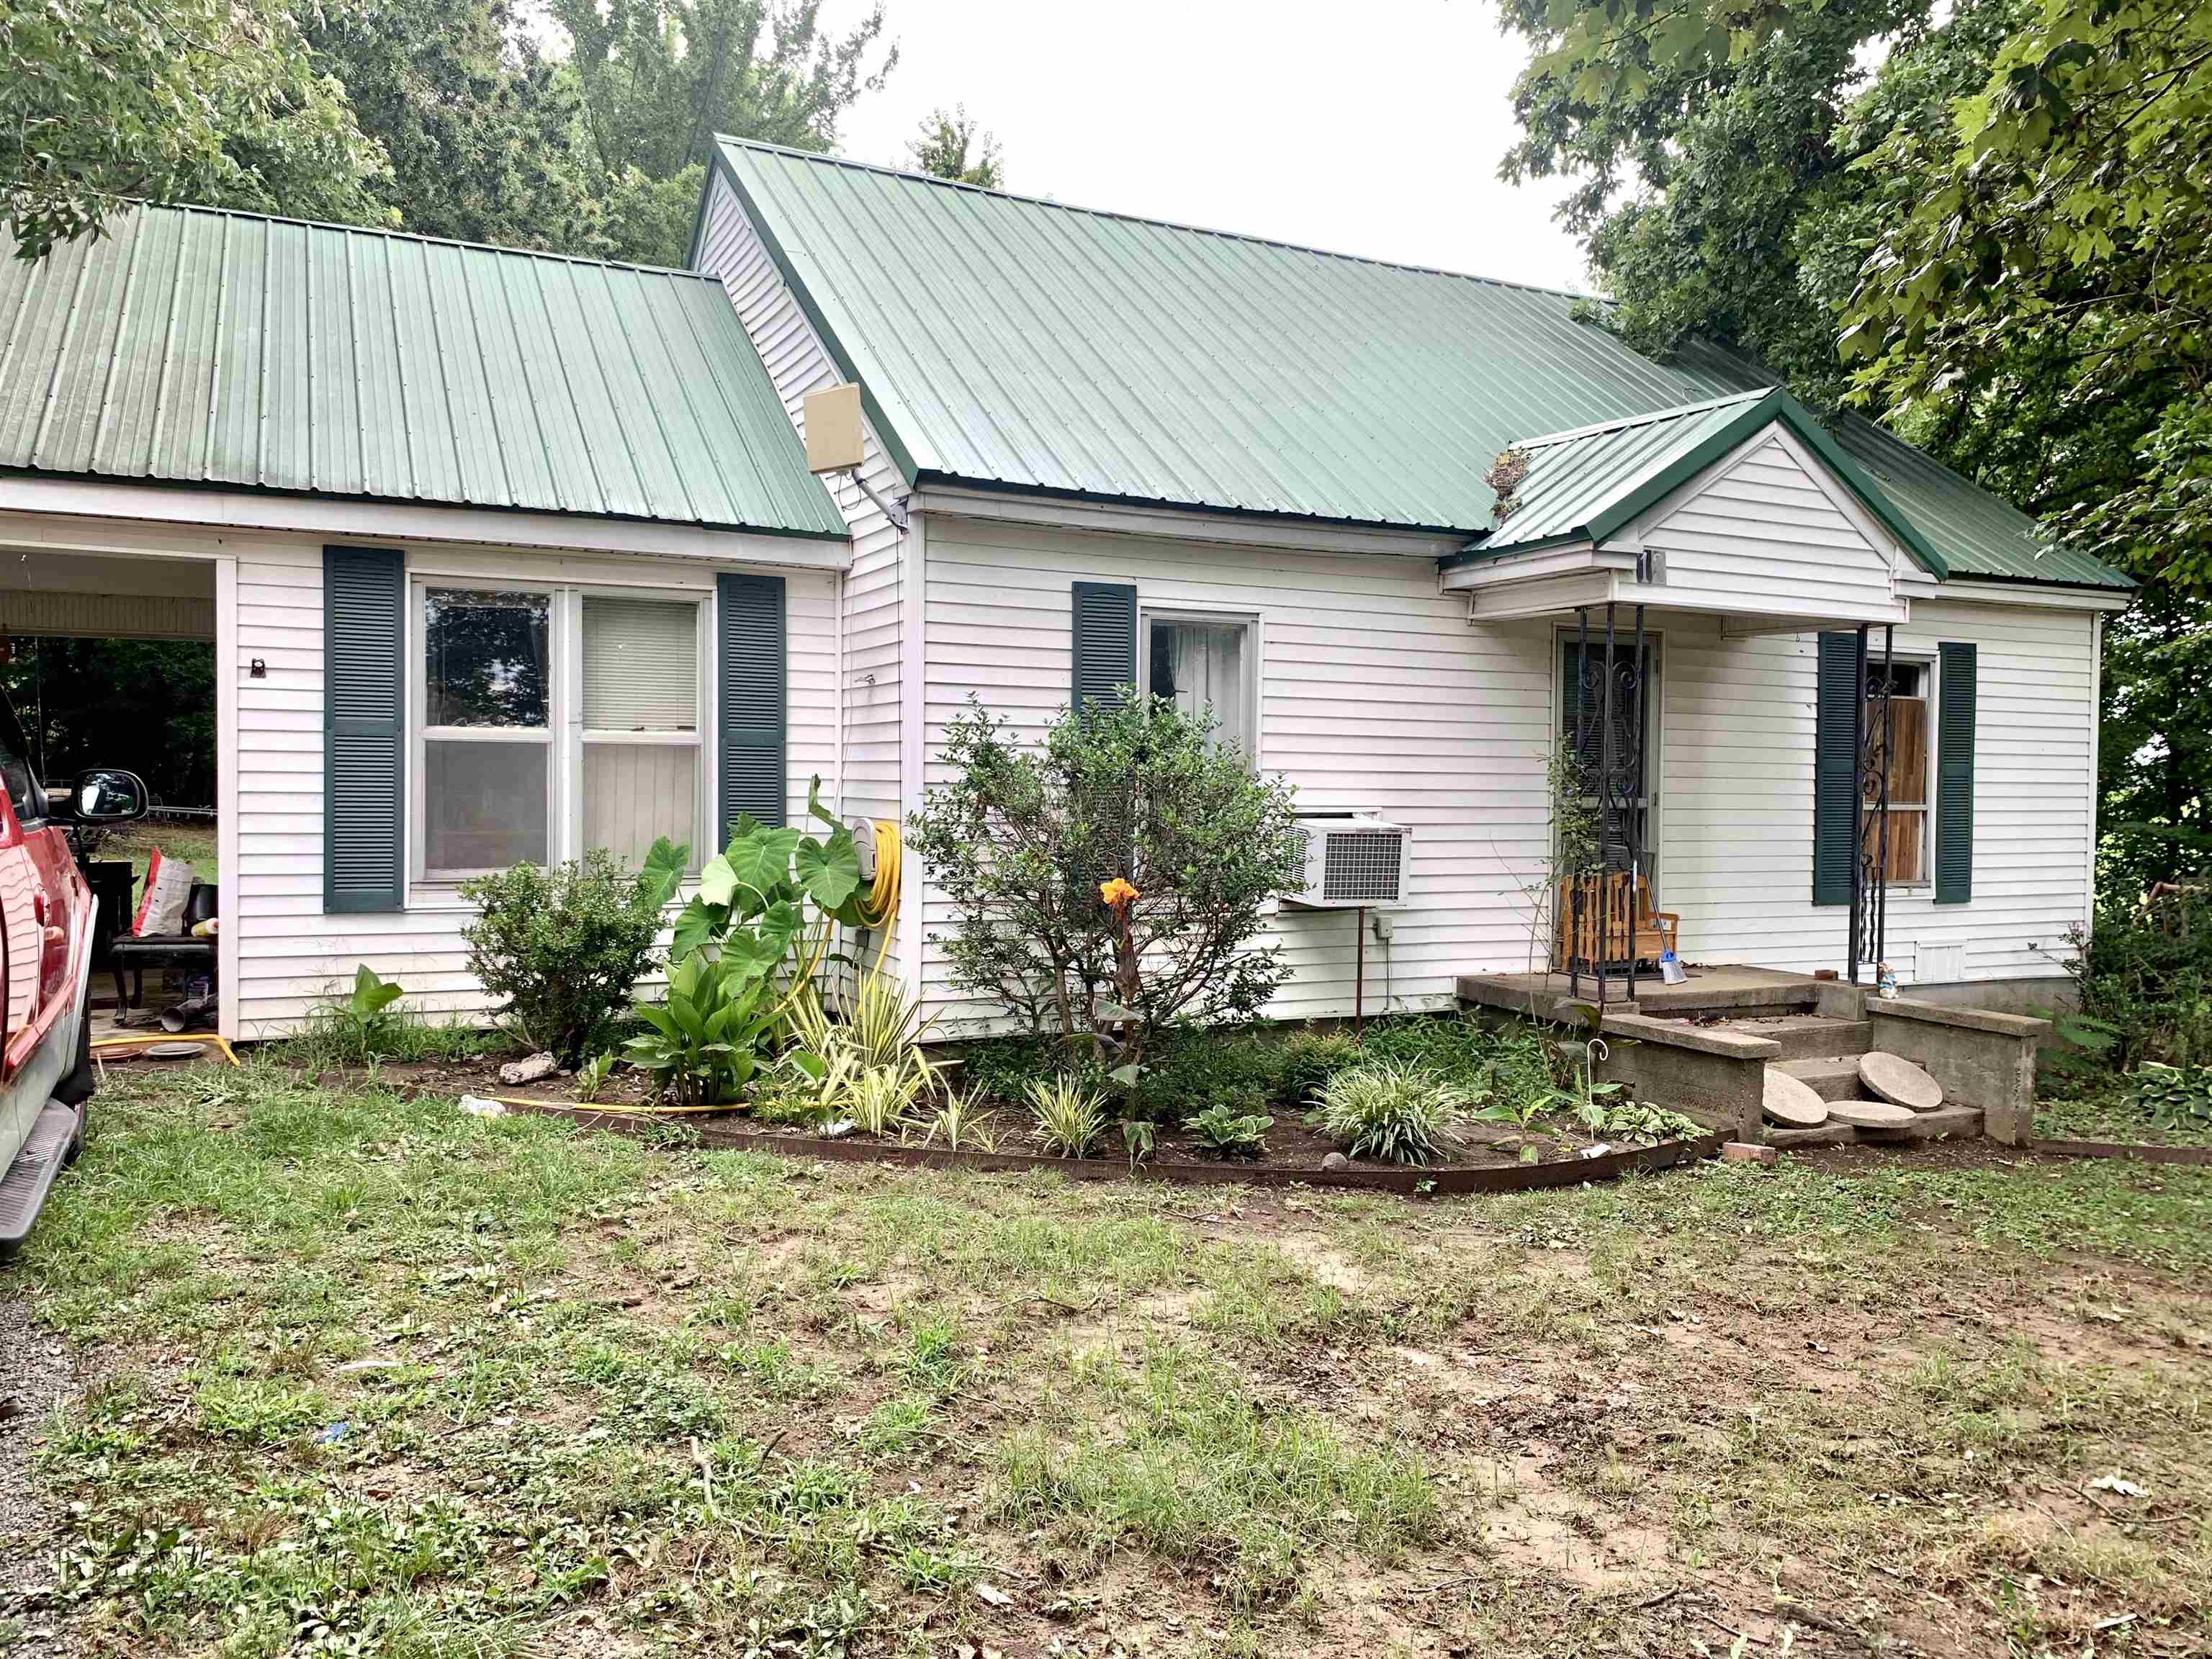 13 Nebo Yorkville Road, Newbern, Tennessee 38059, 3 Bedrooms Bedrooms, ,1 BathroomBathrooms,Residential,For Sale,13 Nebo Yorkville Road,240885